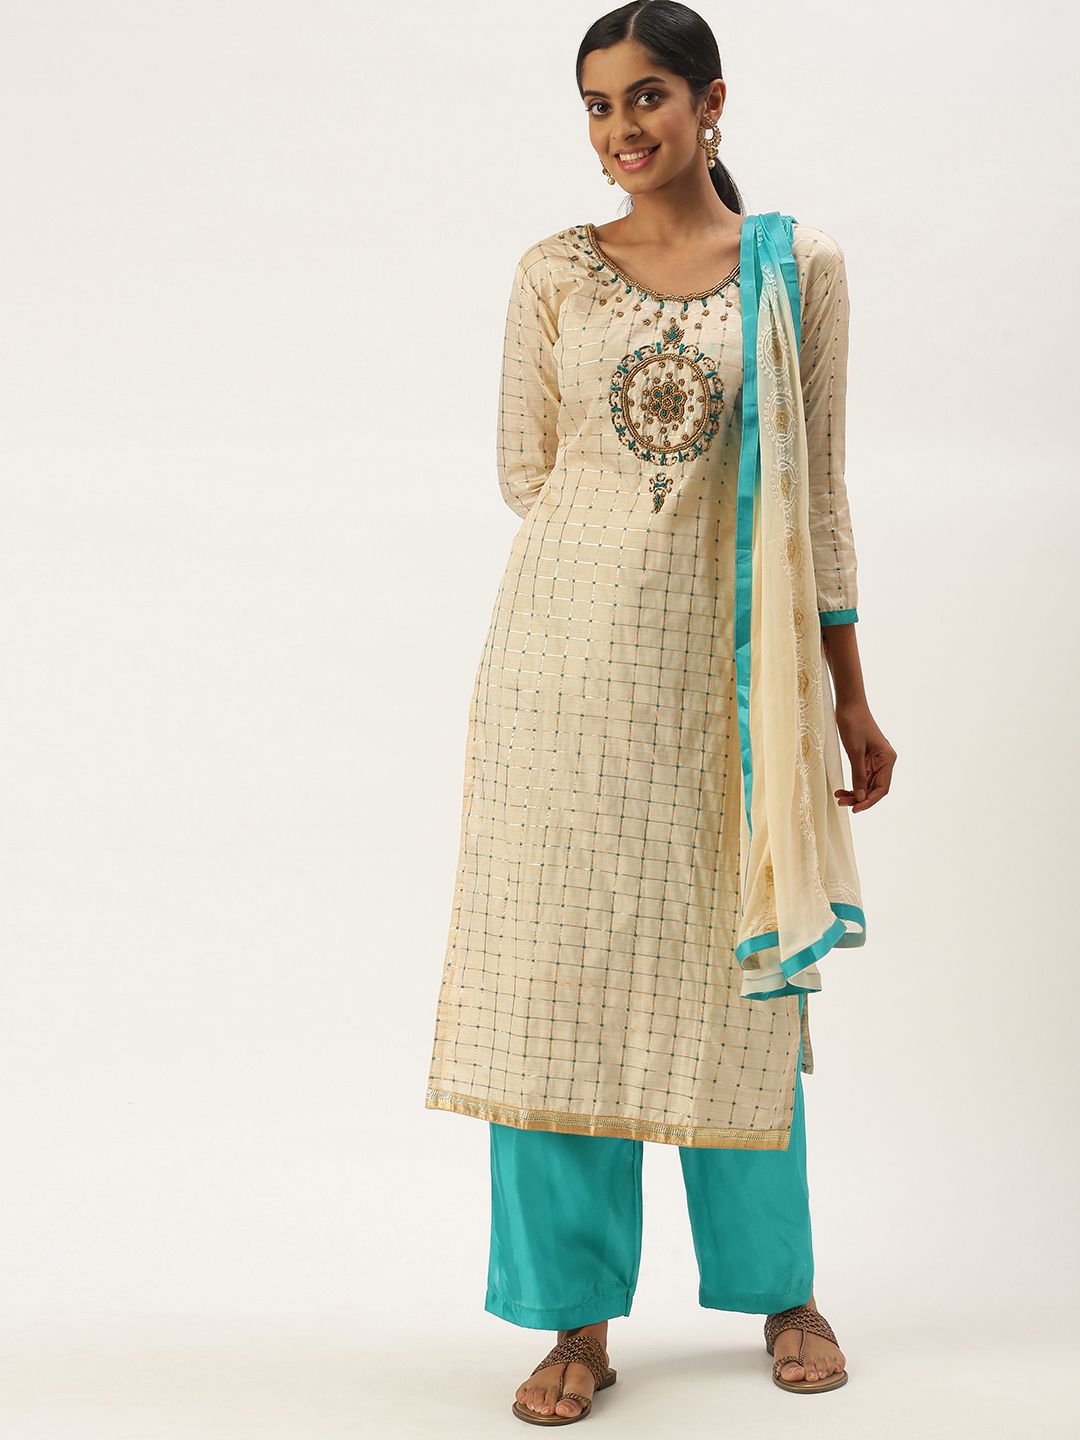 LADUSAA Off White & Blue Embroidered Unstitched Dress Material Price in India